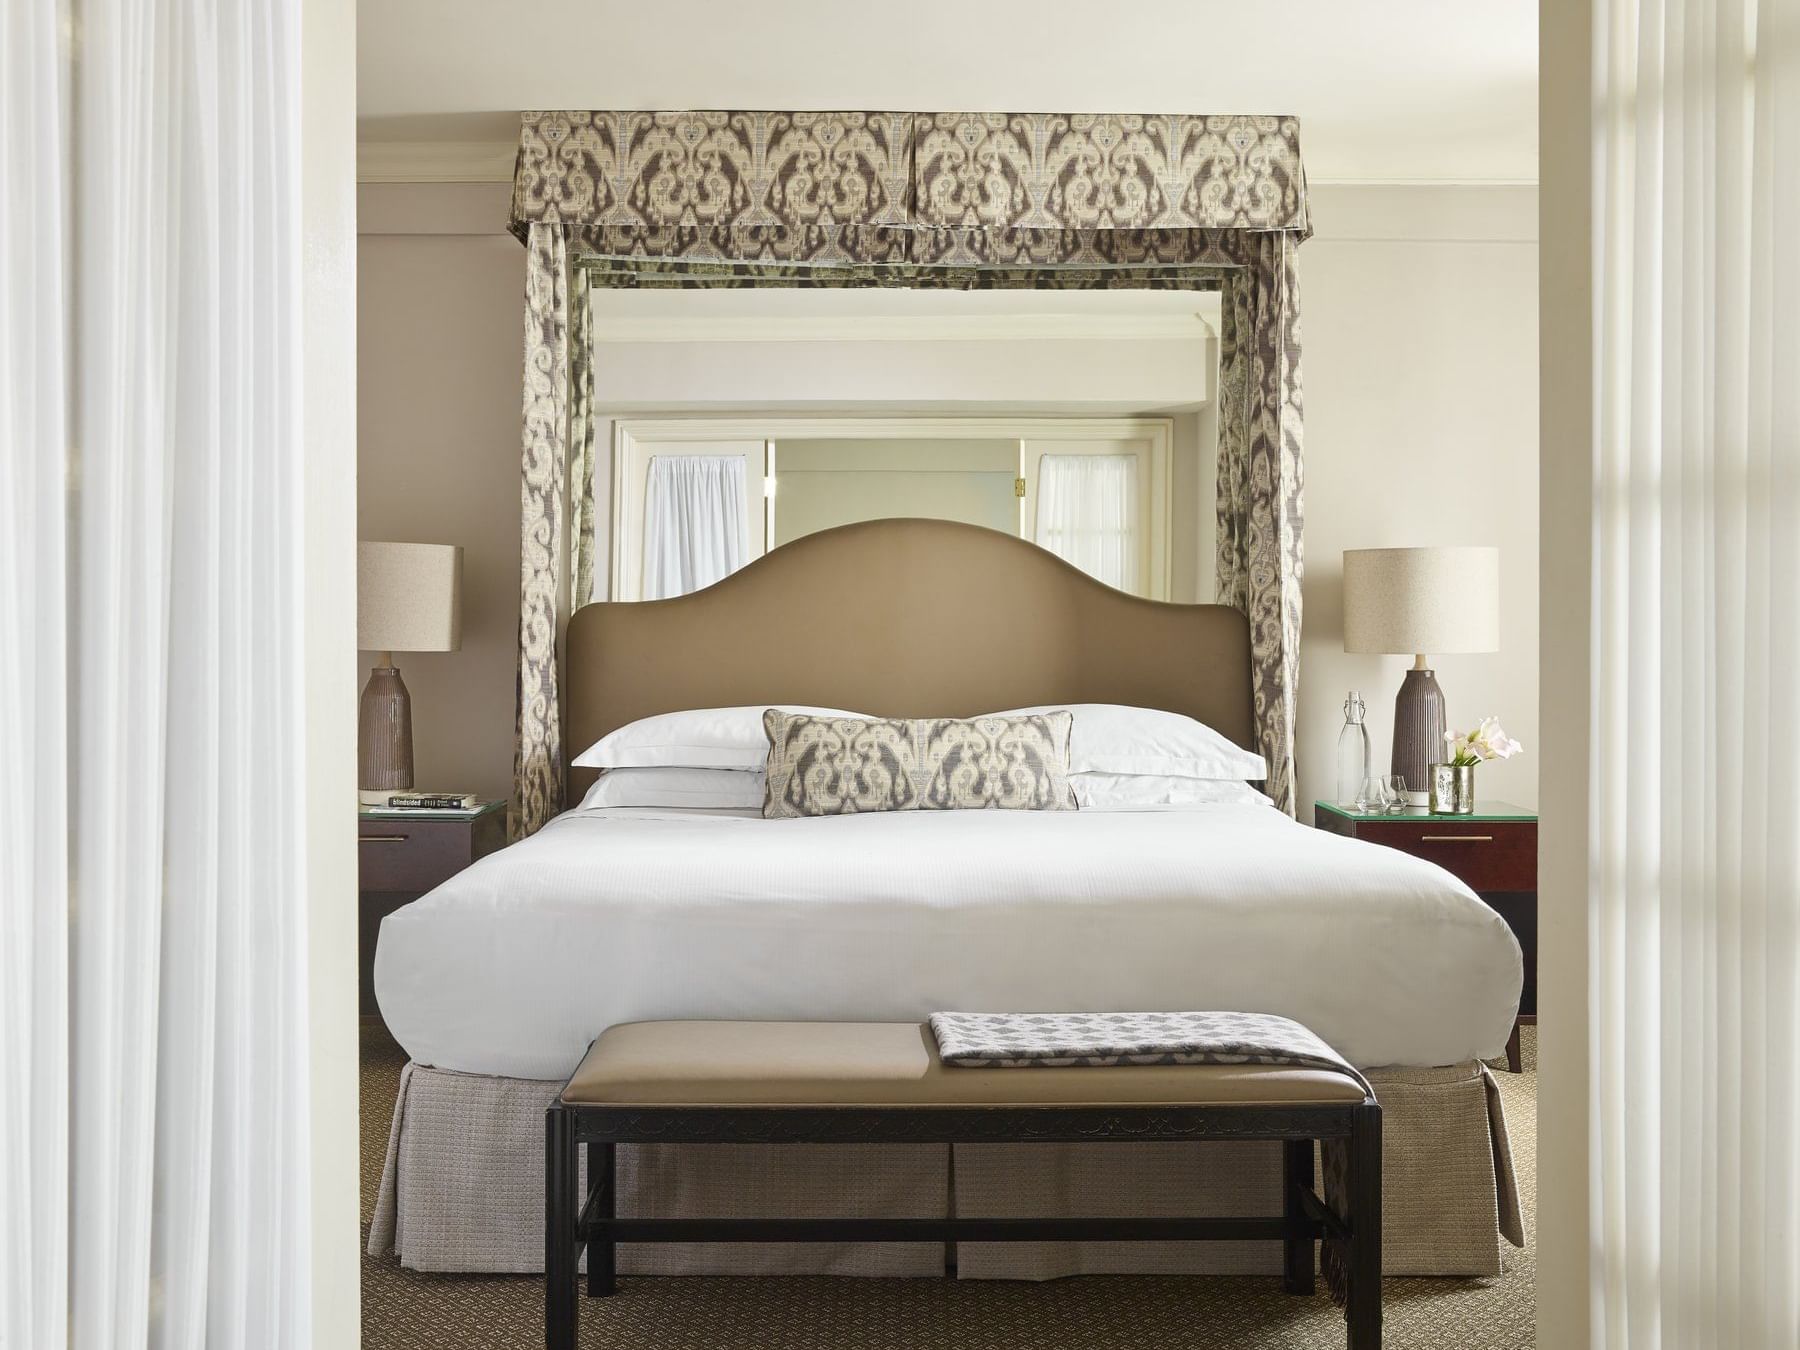 One-Bedroom Suite with a king bed & nightstands at Eliot Hotel